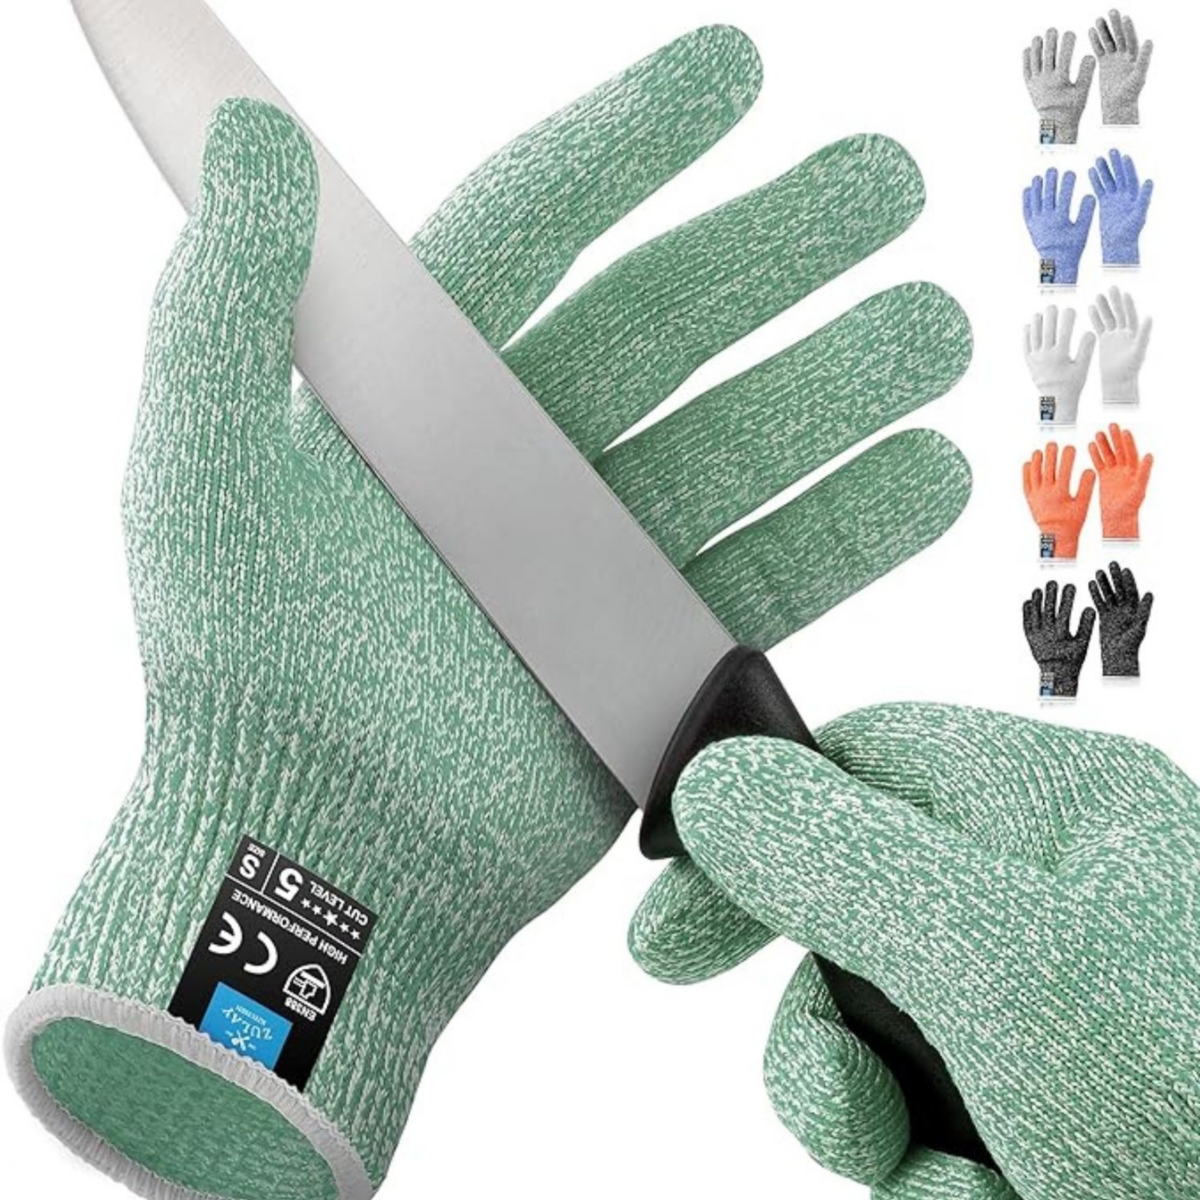 Zulay Kitchen Cut Resistant Gloves Food Grade Level 5 Protection In Green